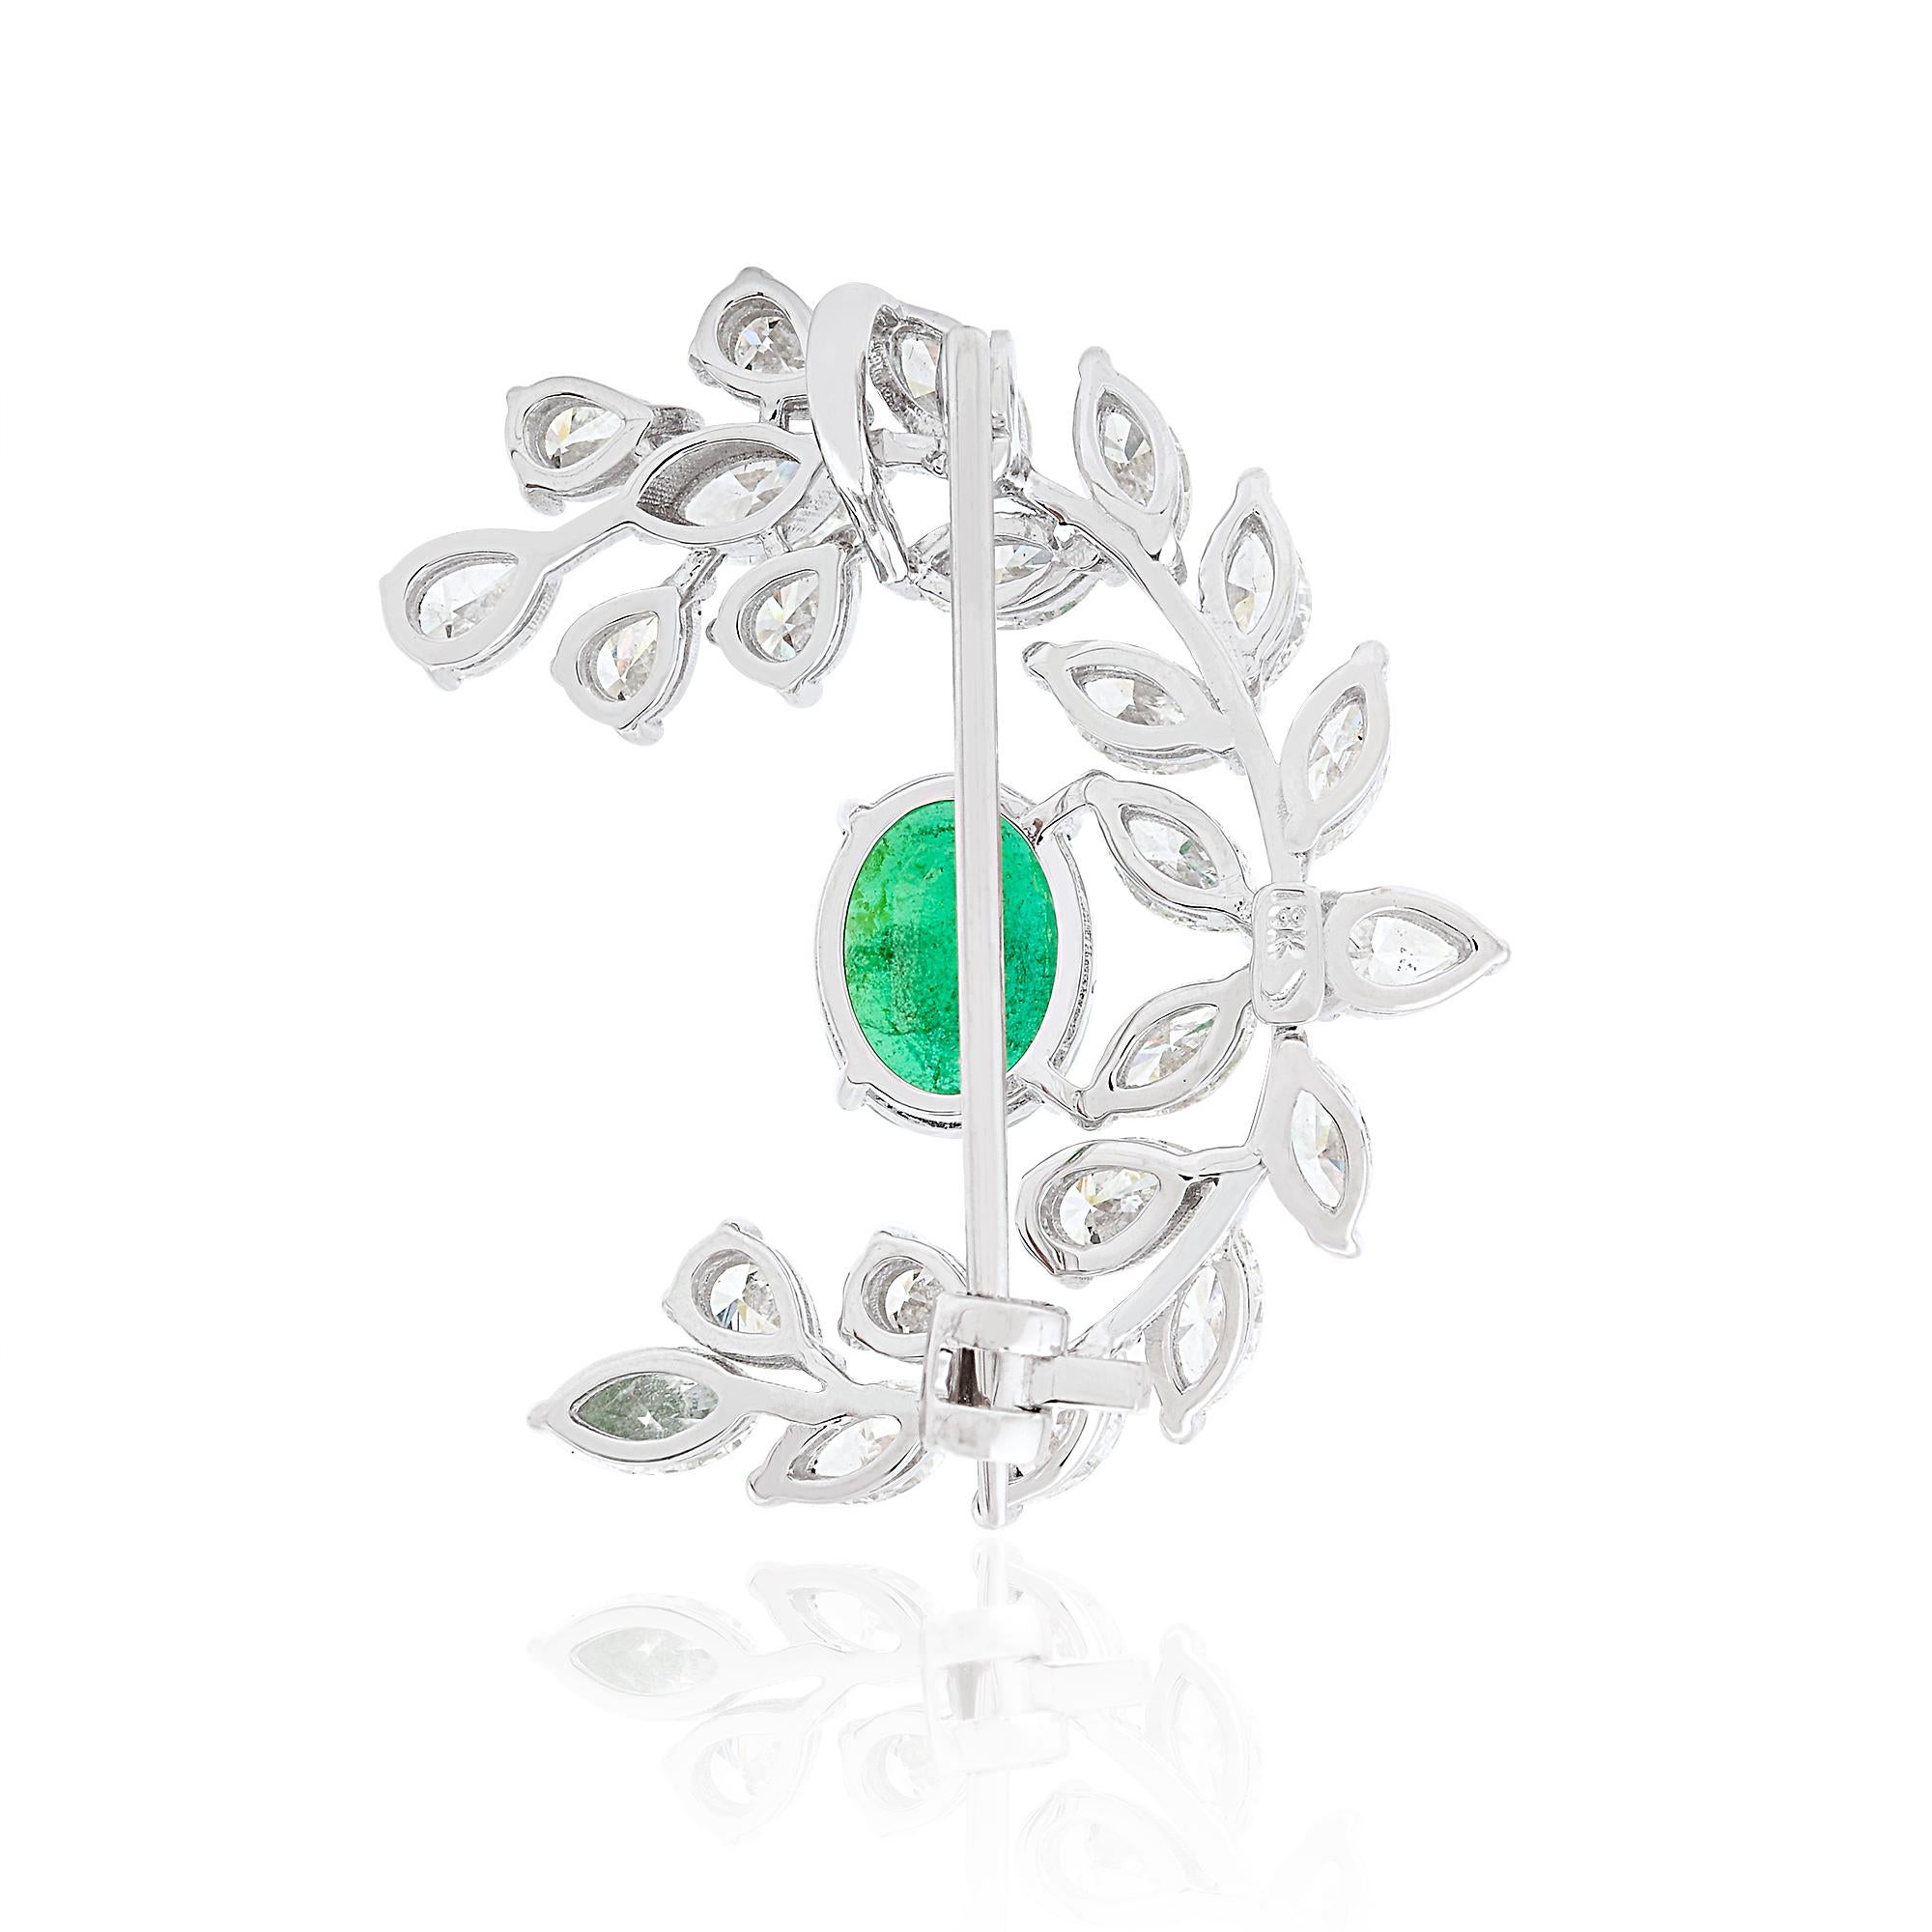 Item Code:- SEPD-3247
Gross Wt :- 8.11 gm
18k White Gold Wt :- 7.020 gm
Diamond Wt :- 3.400 ct. ( AVERAGE DIAMOND CLARITY SI1-SI2 & COLOR H-I )
Natural Emerald Wt :- 2.050 ct.
Brooch Size :- 31x23 mm Approx

✦ Sizing
.....................
We can